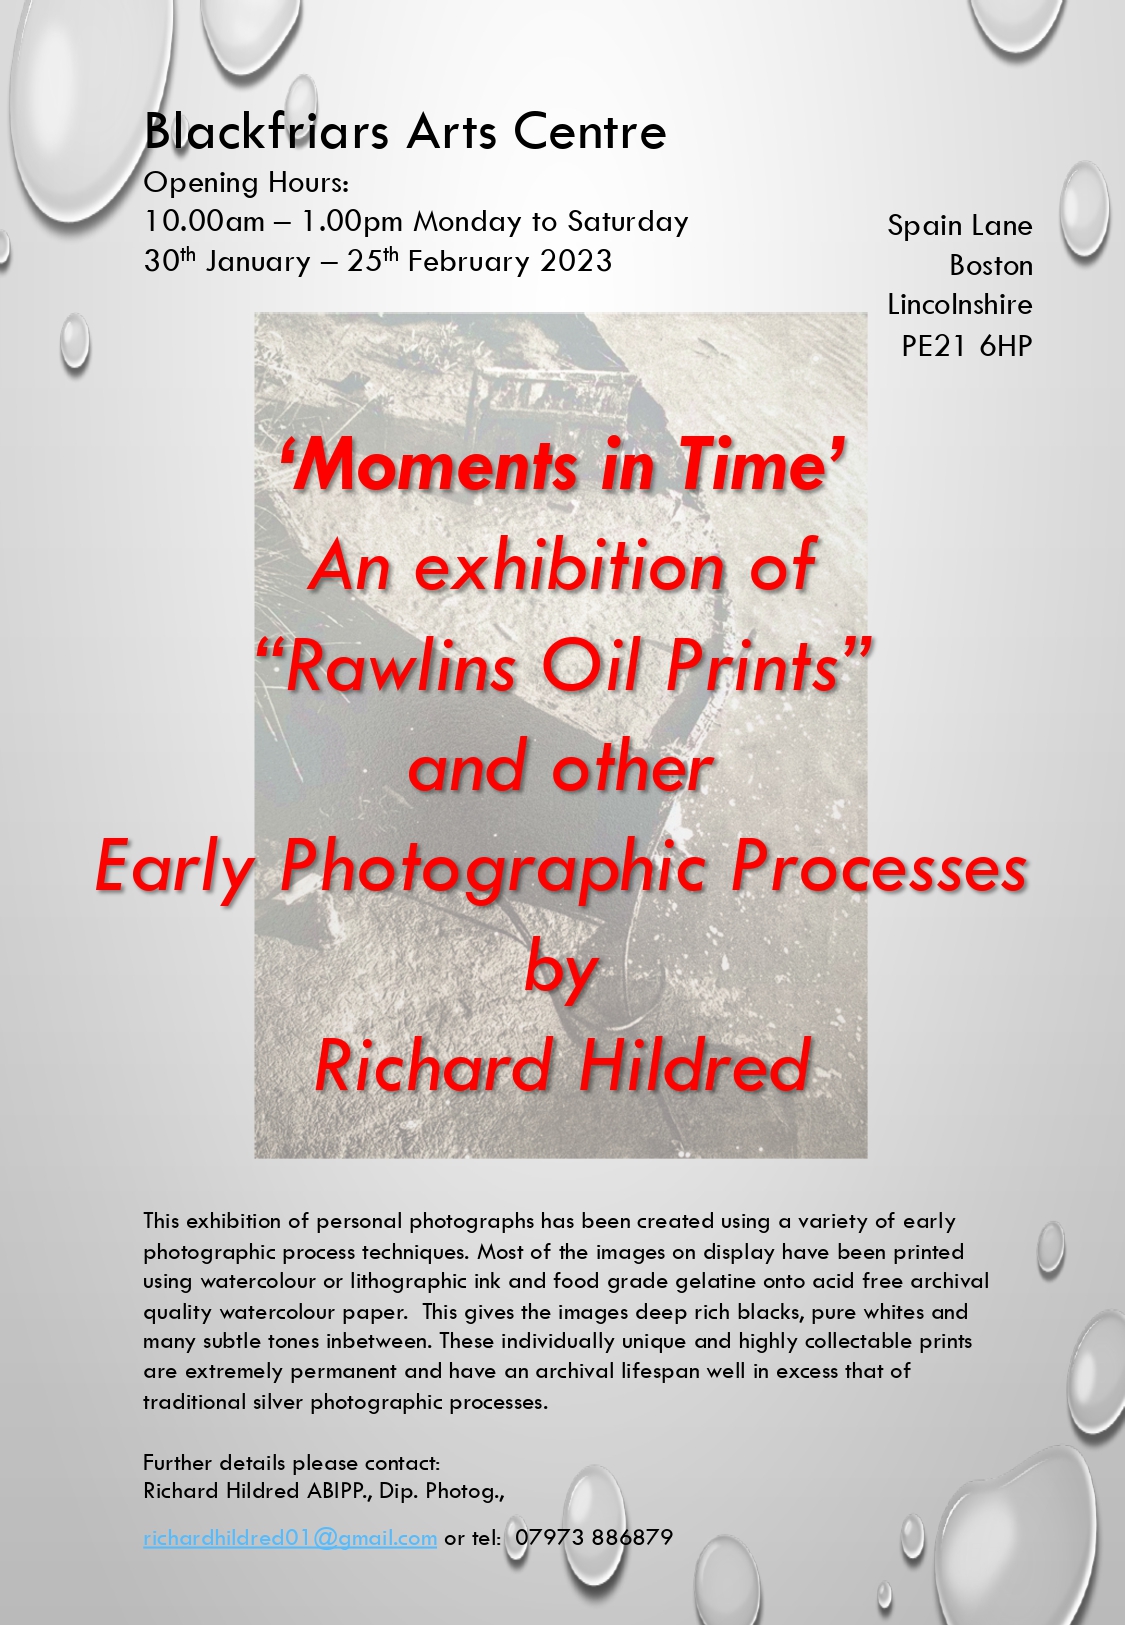 'Moments in Time' An Exhibition of 'Rawlins Oil Prints' by Richard Hildred